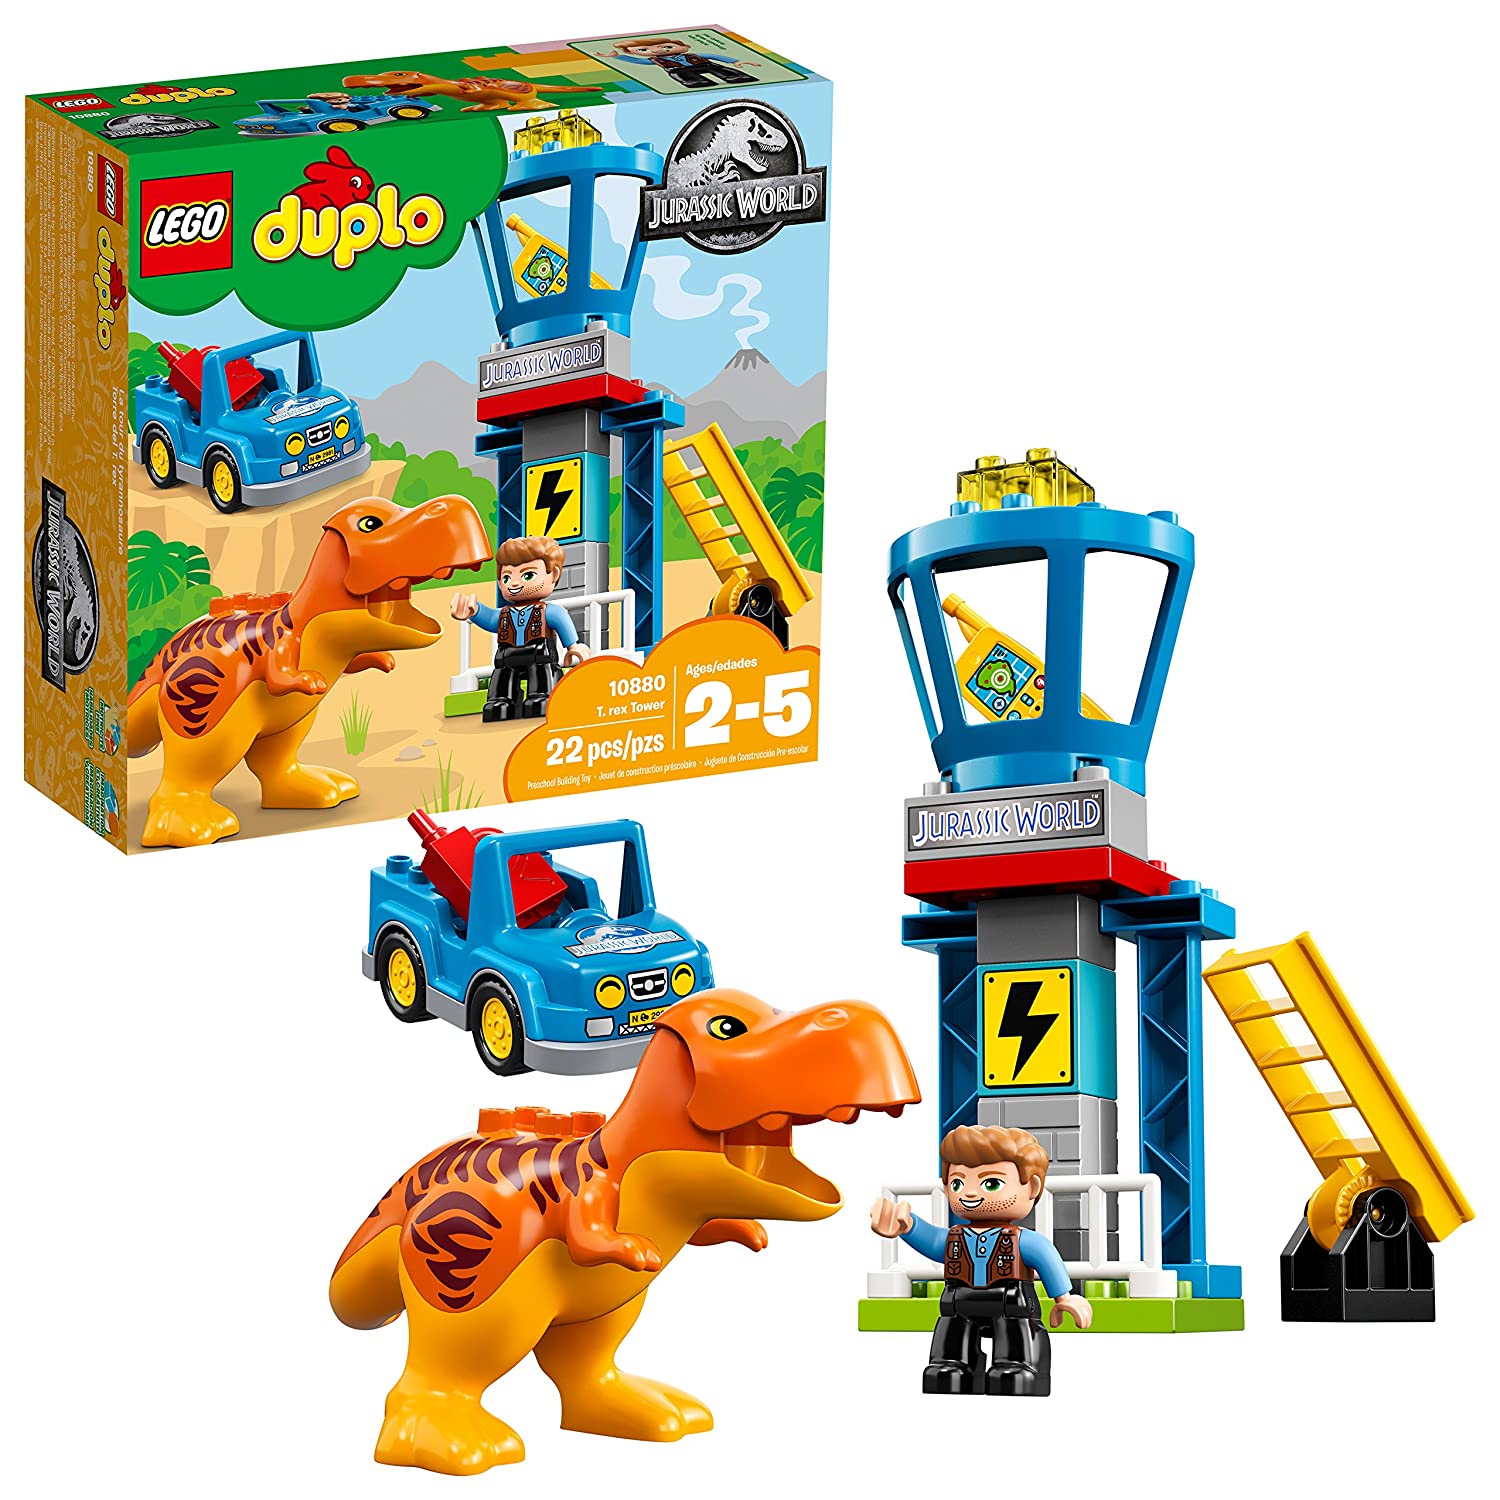 Top 9 Best Lego Duplo Sets Reviews in 2023 8